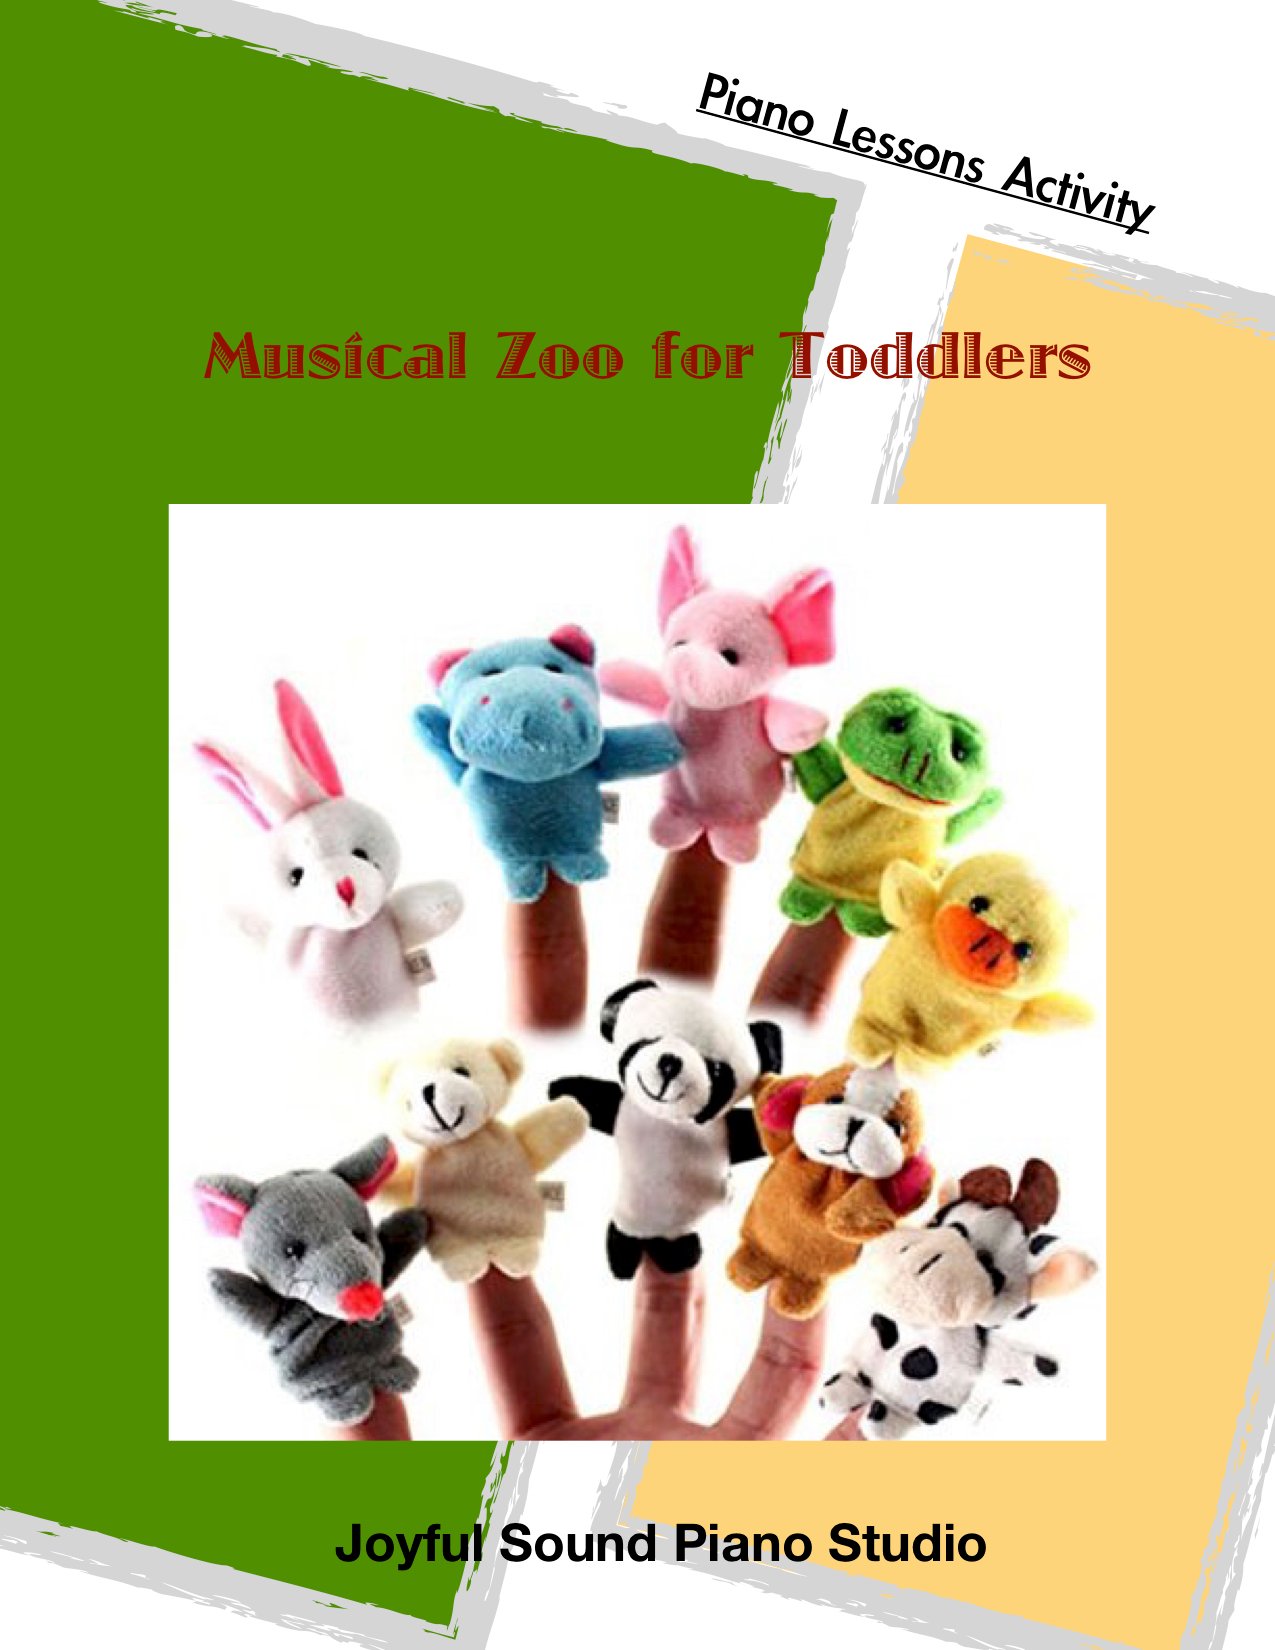 31_Lessons activities_MusicalZoo